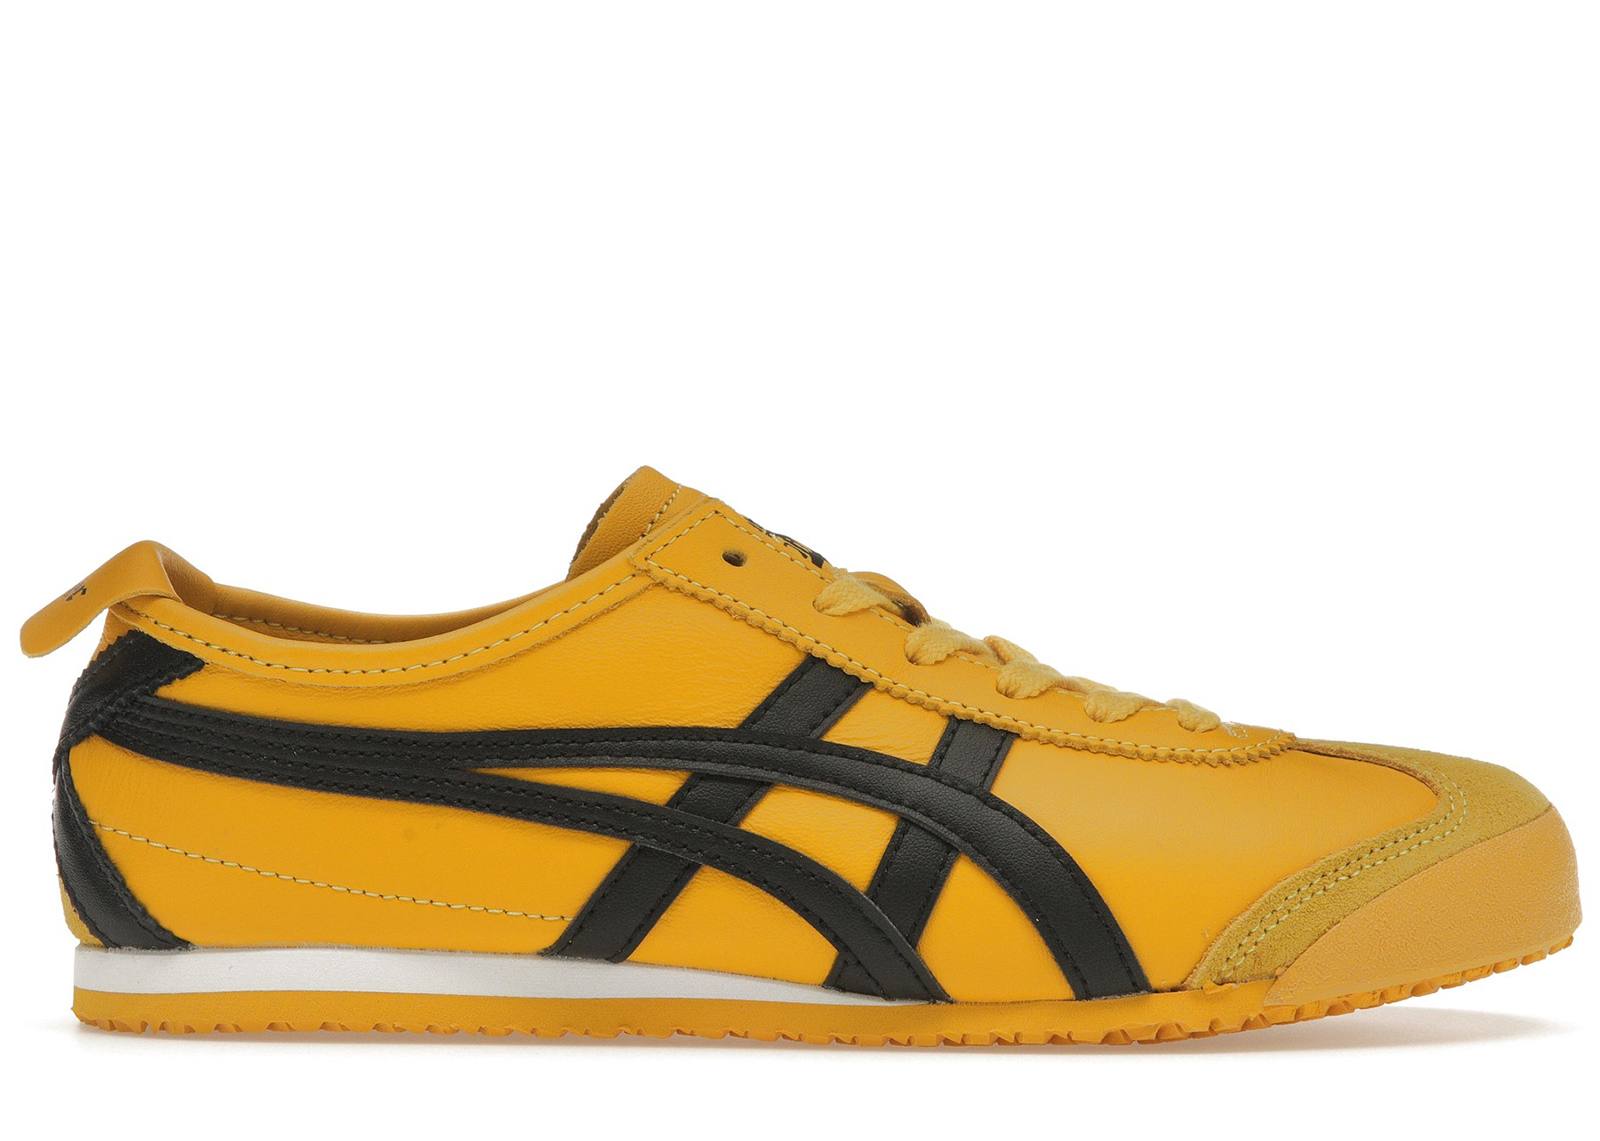 Onitsuka Tiger Mexico 66 Black Sneakers For Men - Buy Onitsuka Tiger Mexico  66 Black Sneakers For Men Online at Best Price - Shop Online for Footwears  in India | Flipkart.com